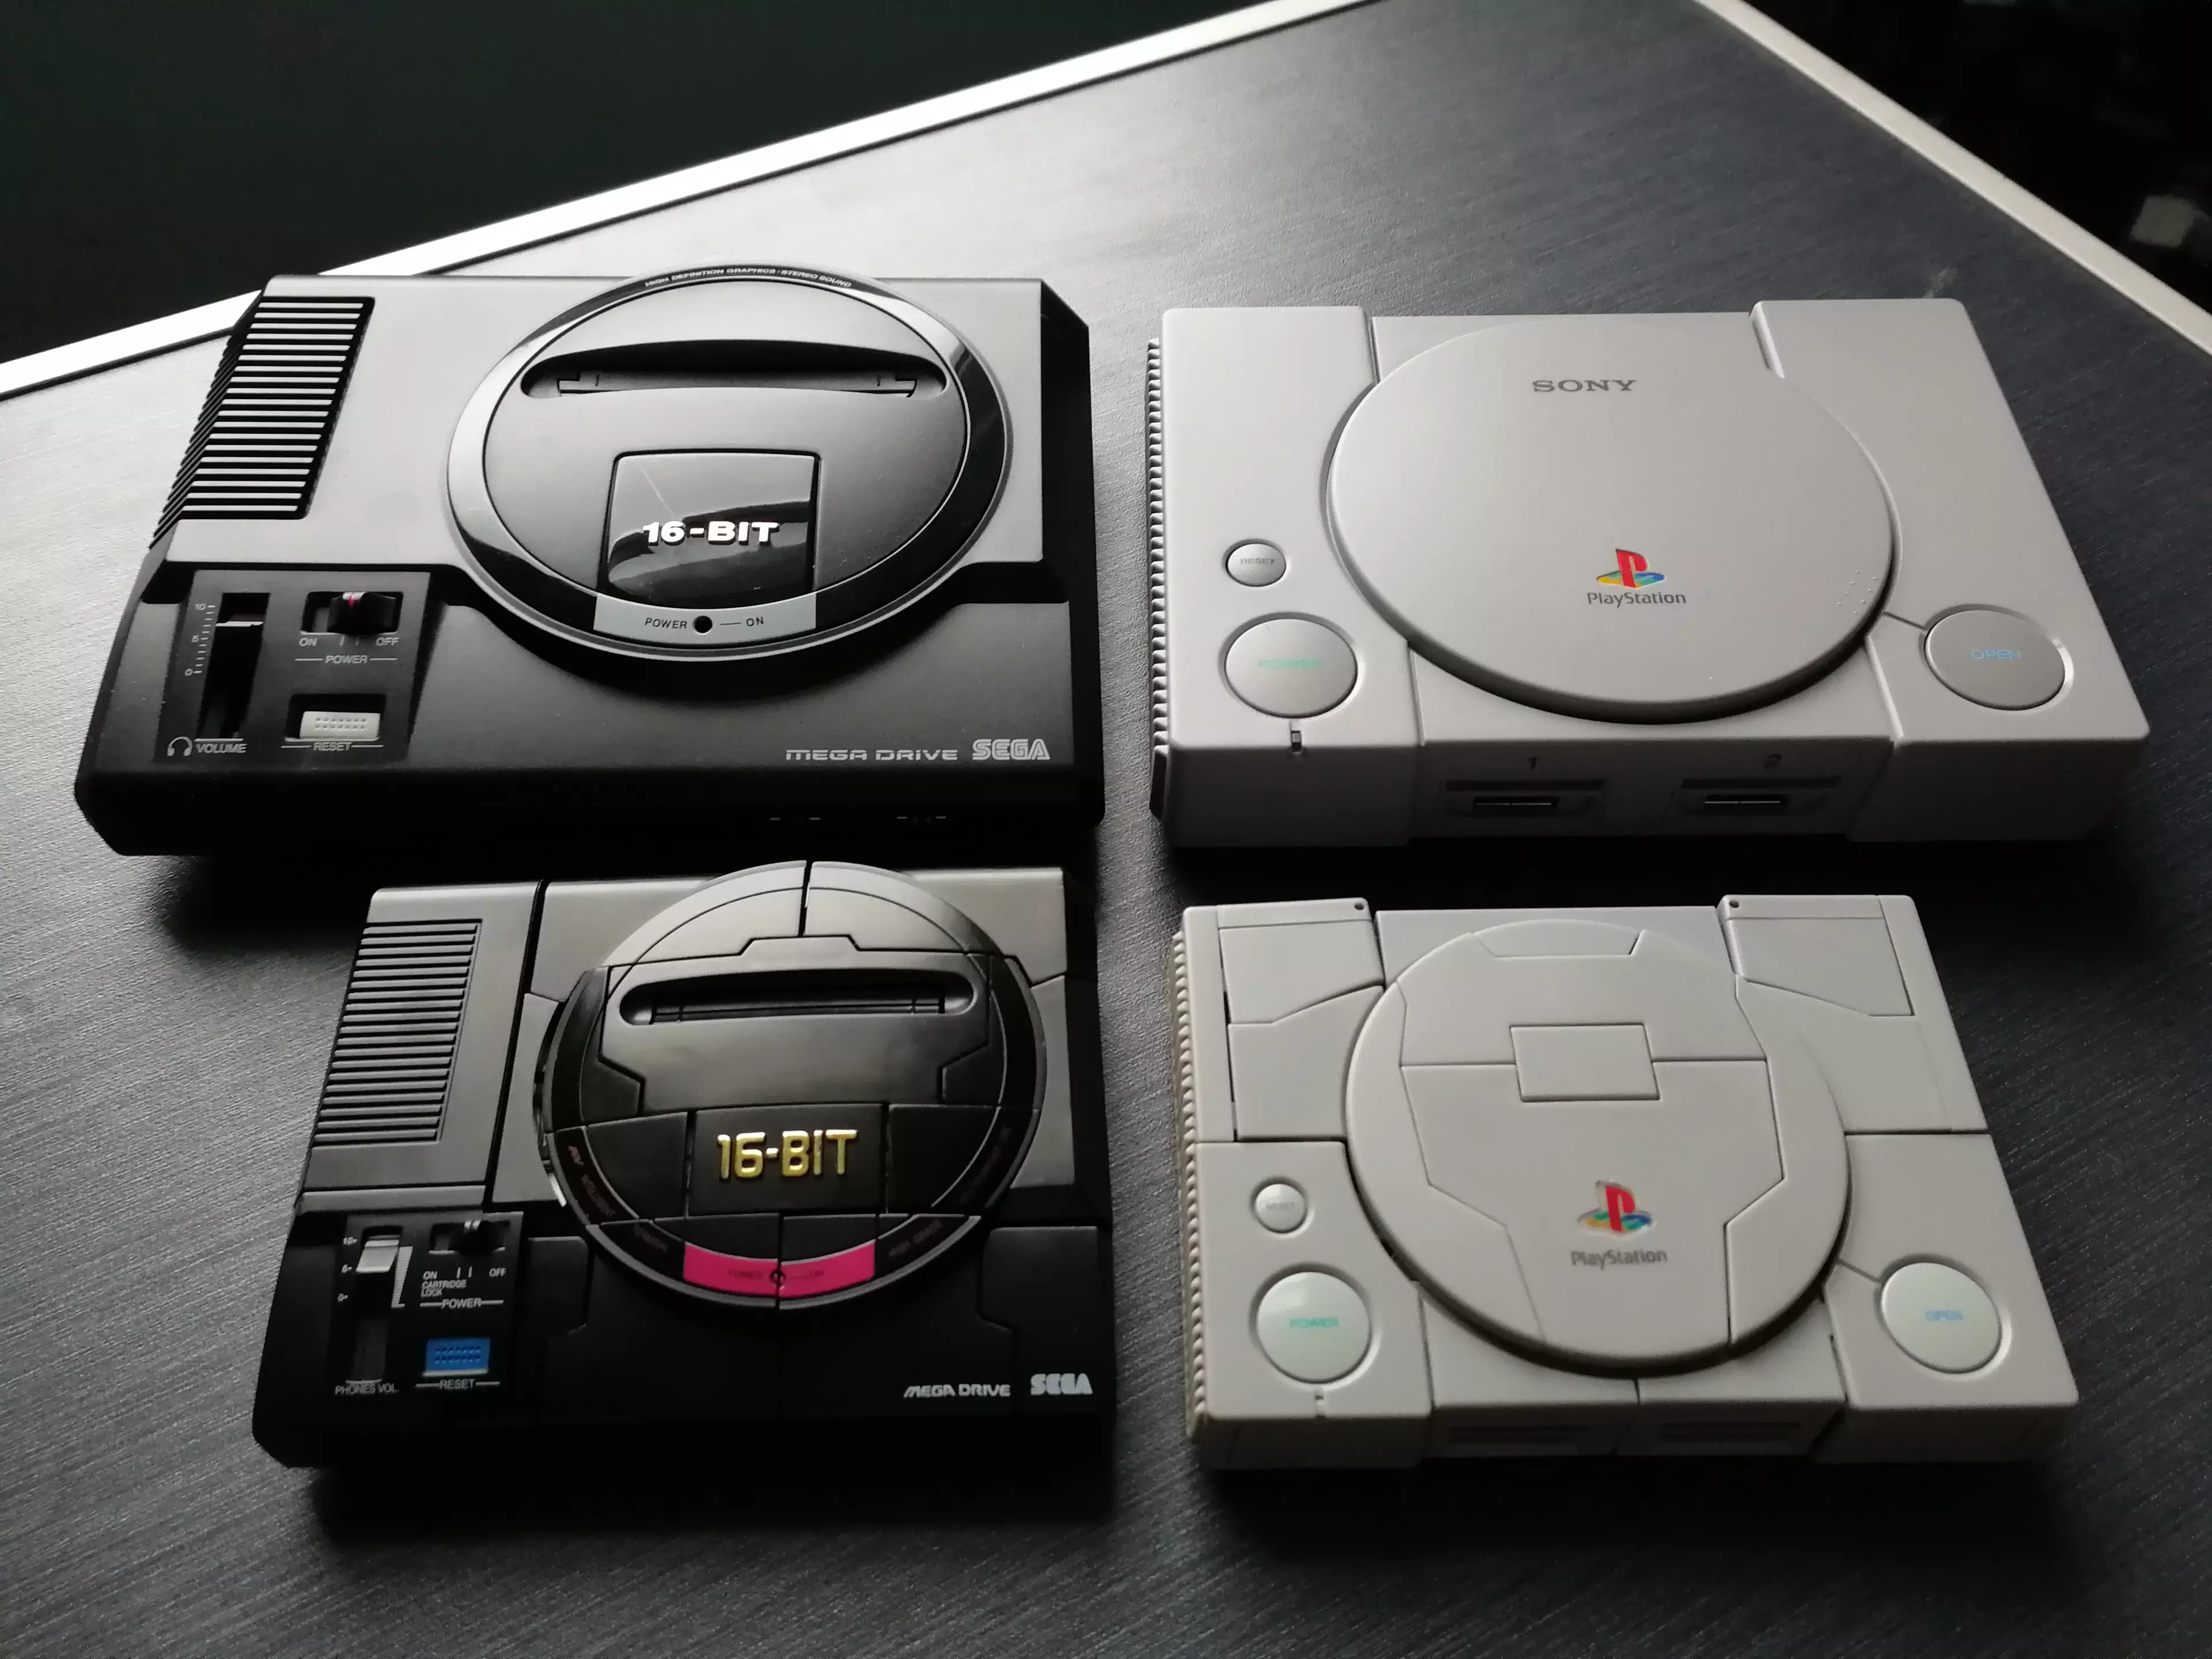 Console Transformers beside the mini versions of the original systems